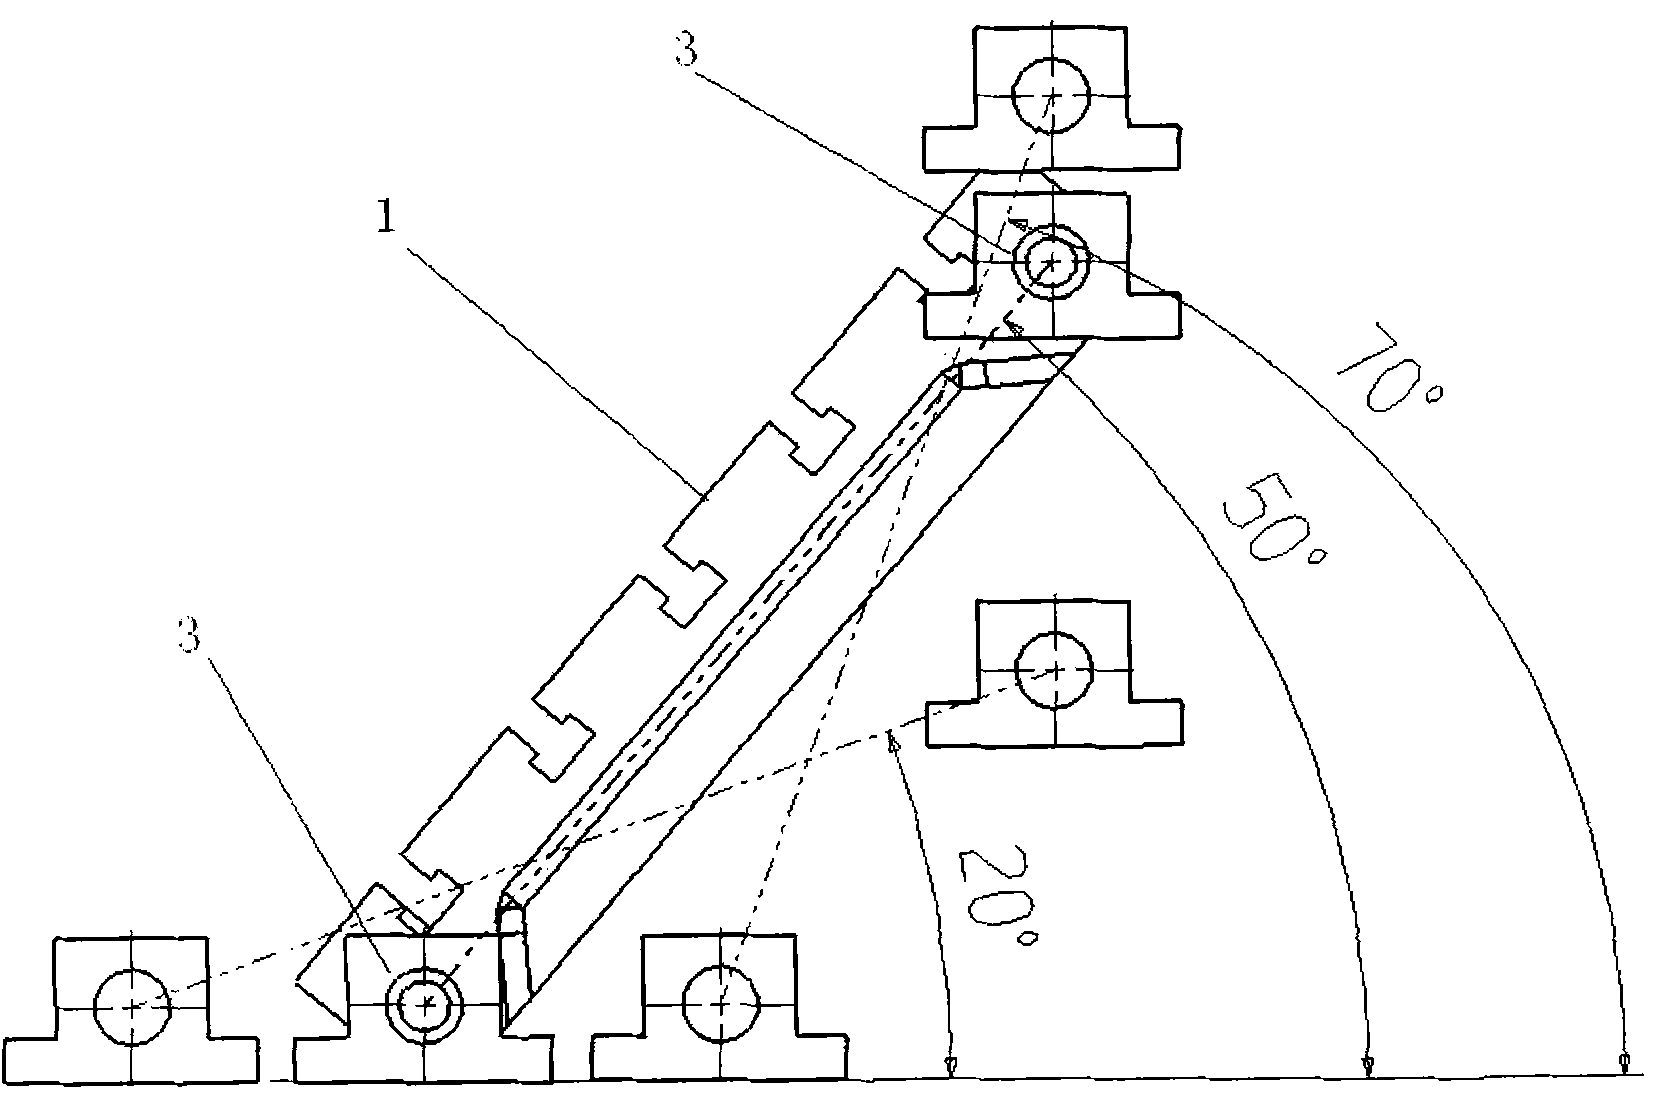 Multi-stage angle-variable machining tool